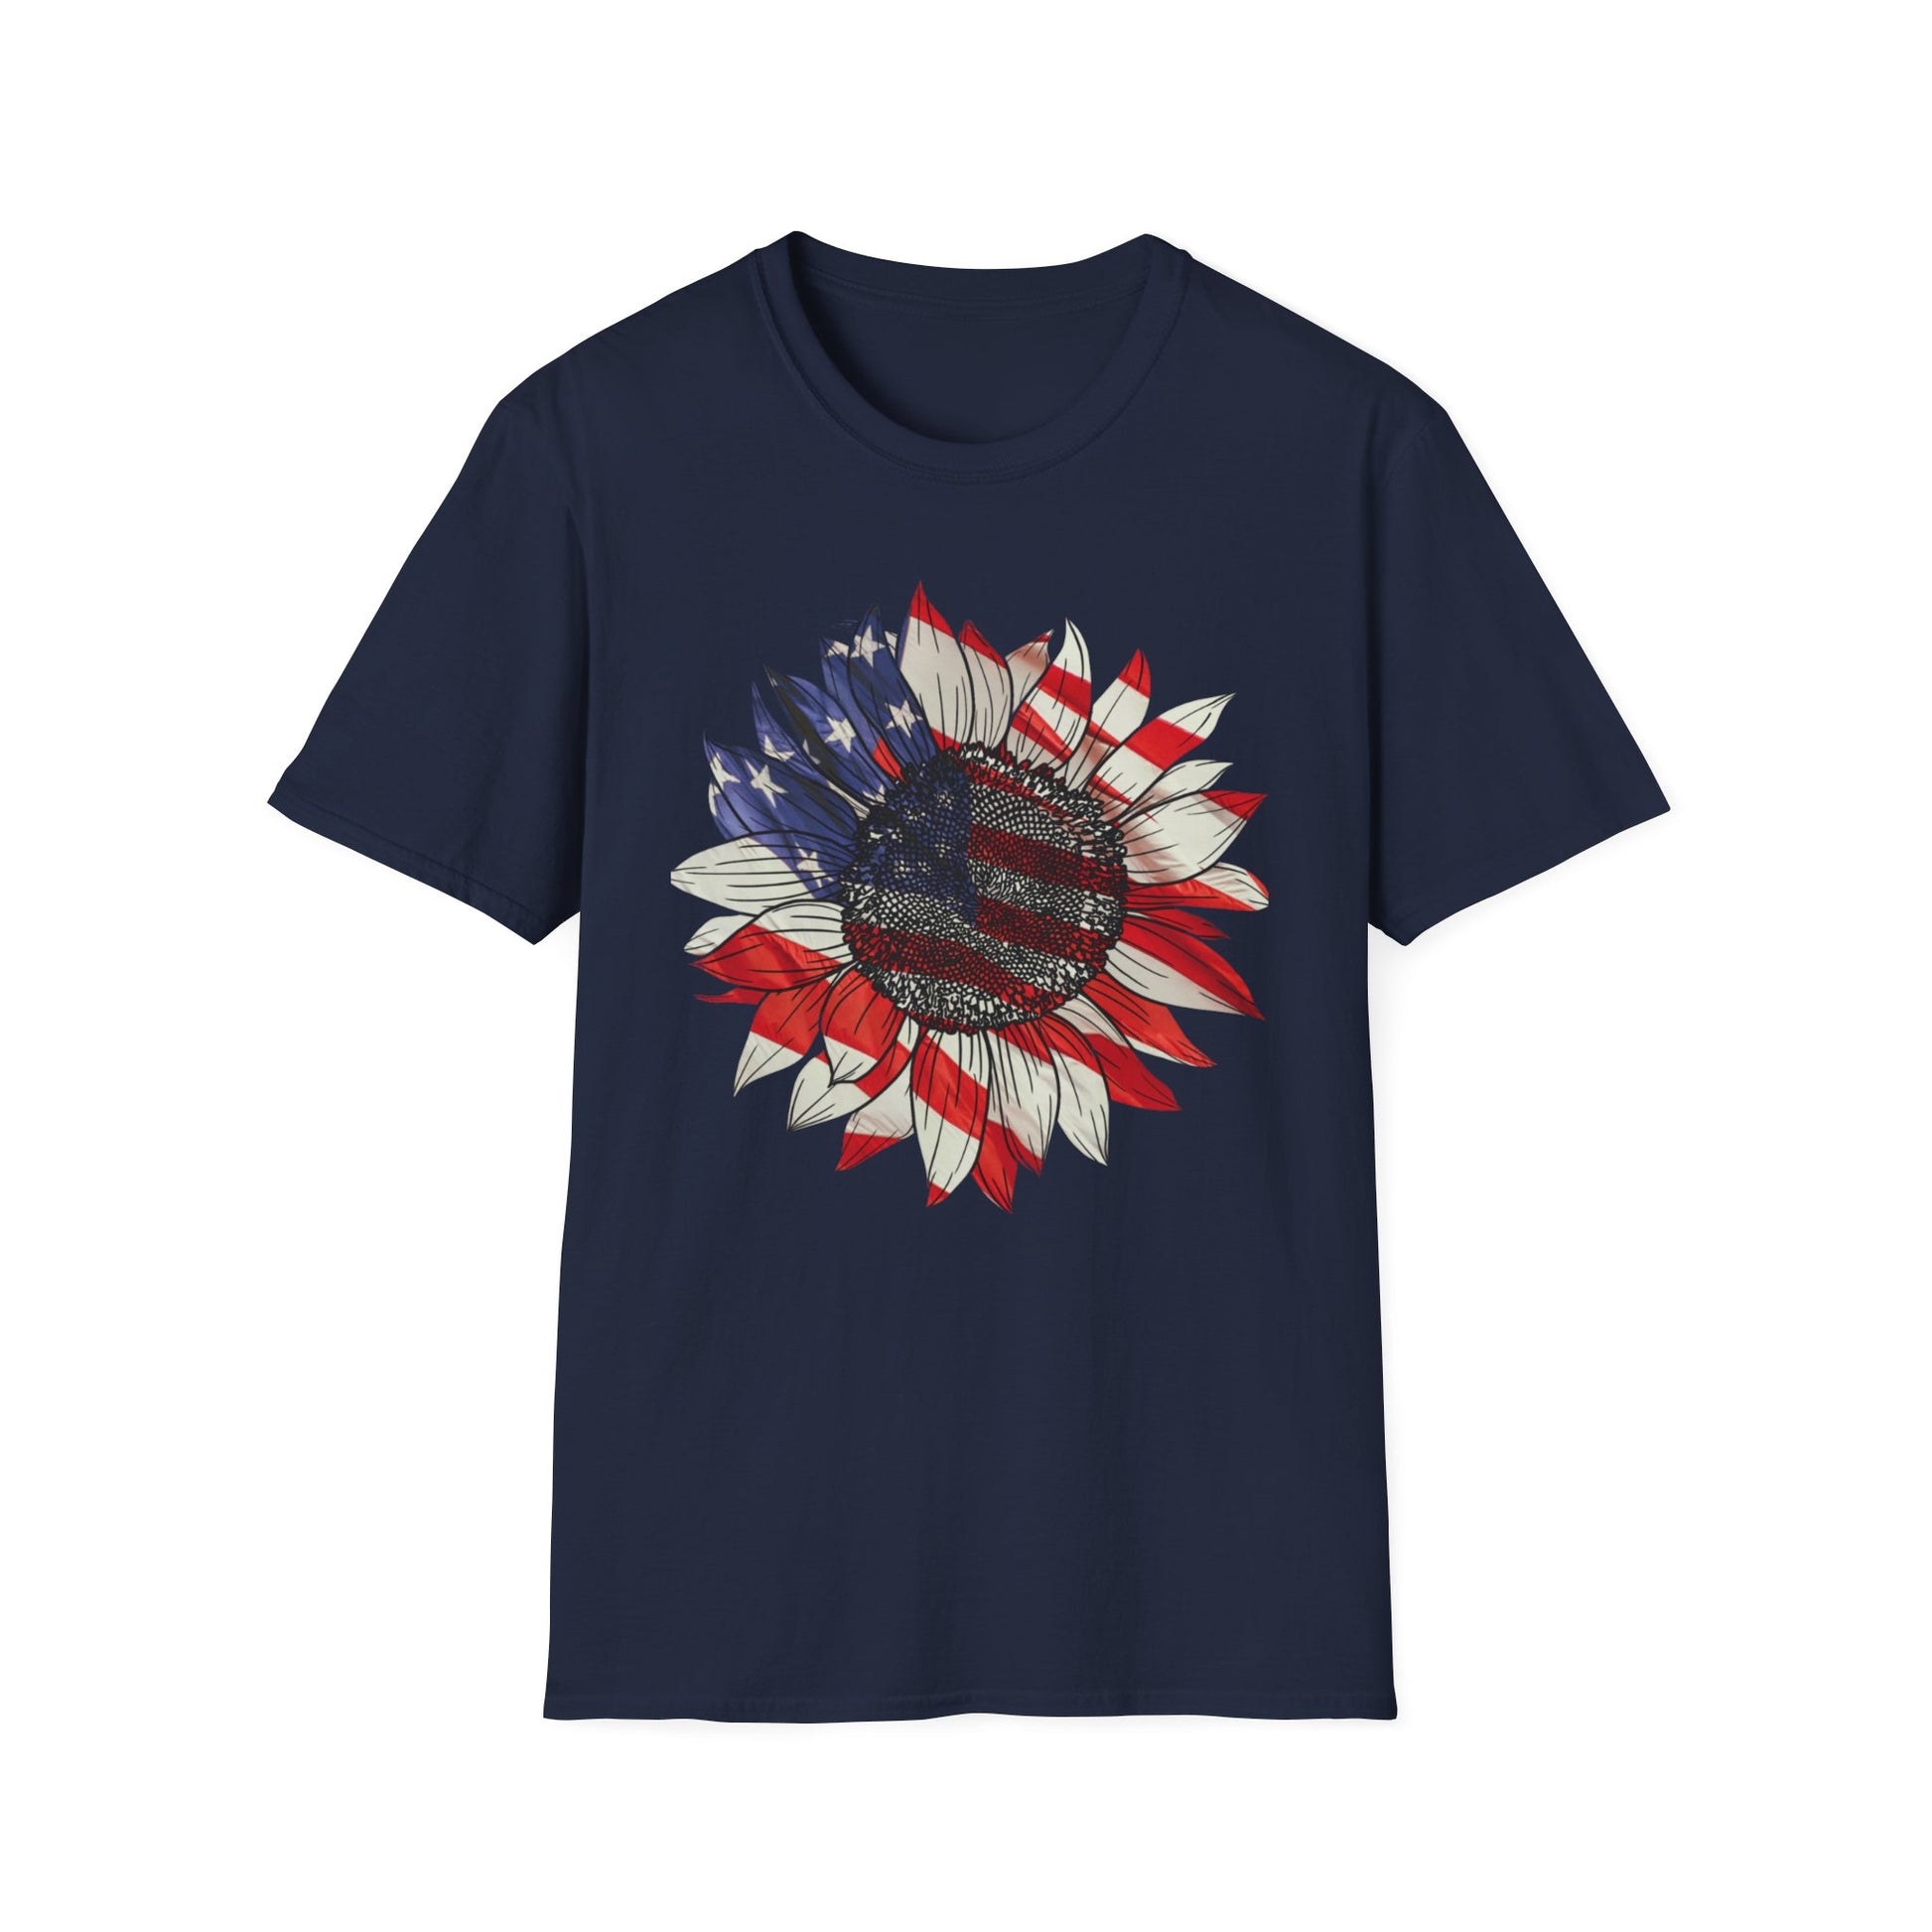 Get trendy with Sunflower American Flag Unisex Softstyle T-Shirt - T-Shirt available at Good Gift Company. Grab yours for $14.99 today!